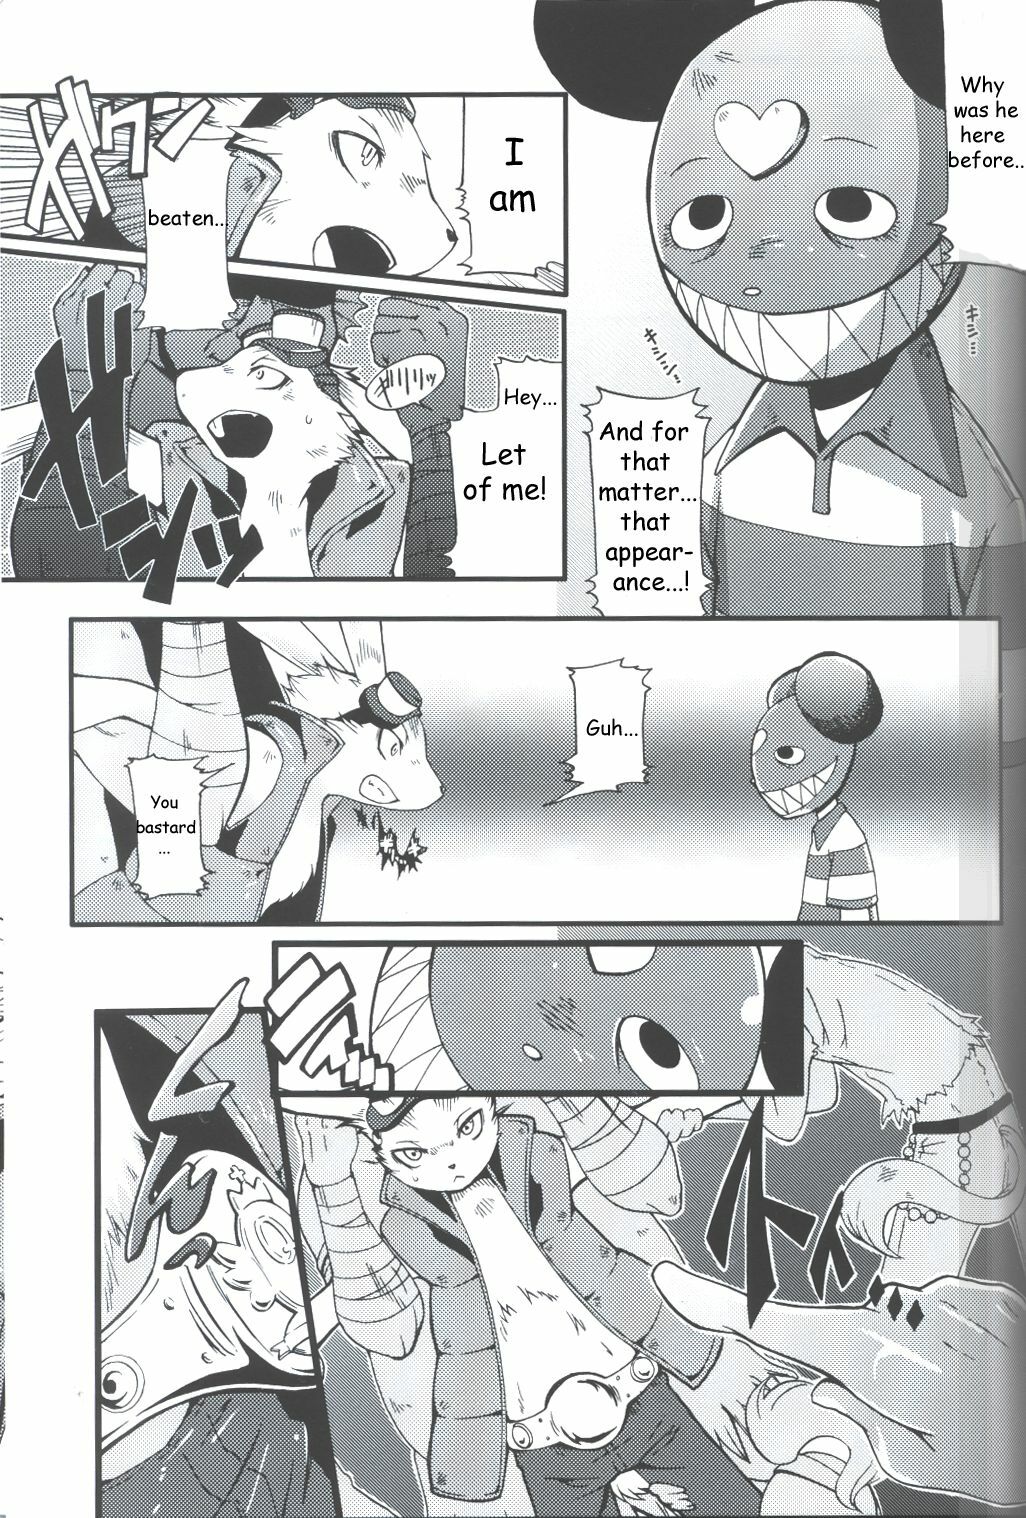 [Dogear (Inumimi Moeta)] Requirements of the King (Summer Wars) [English] page 5 full